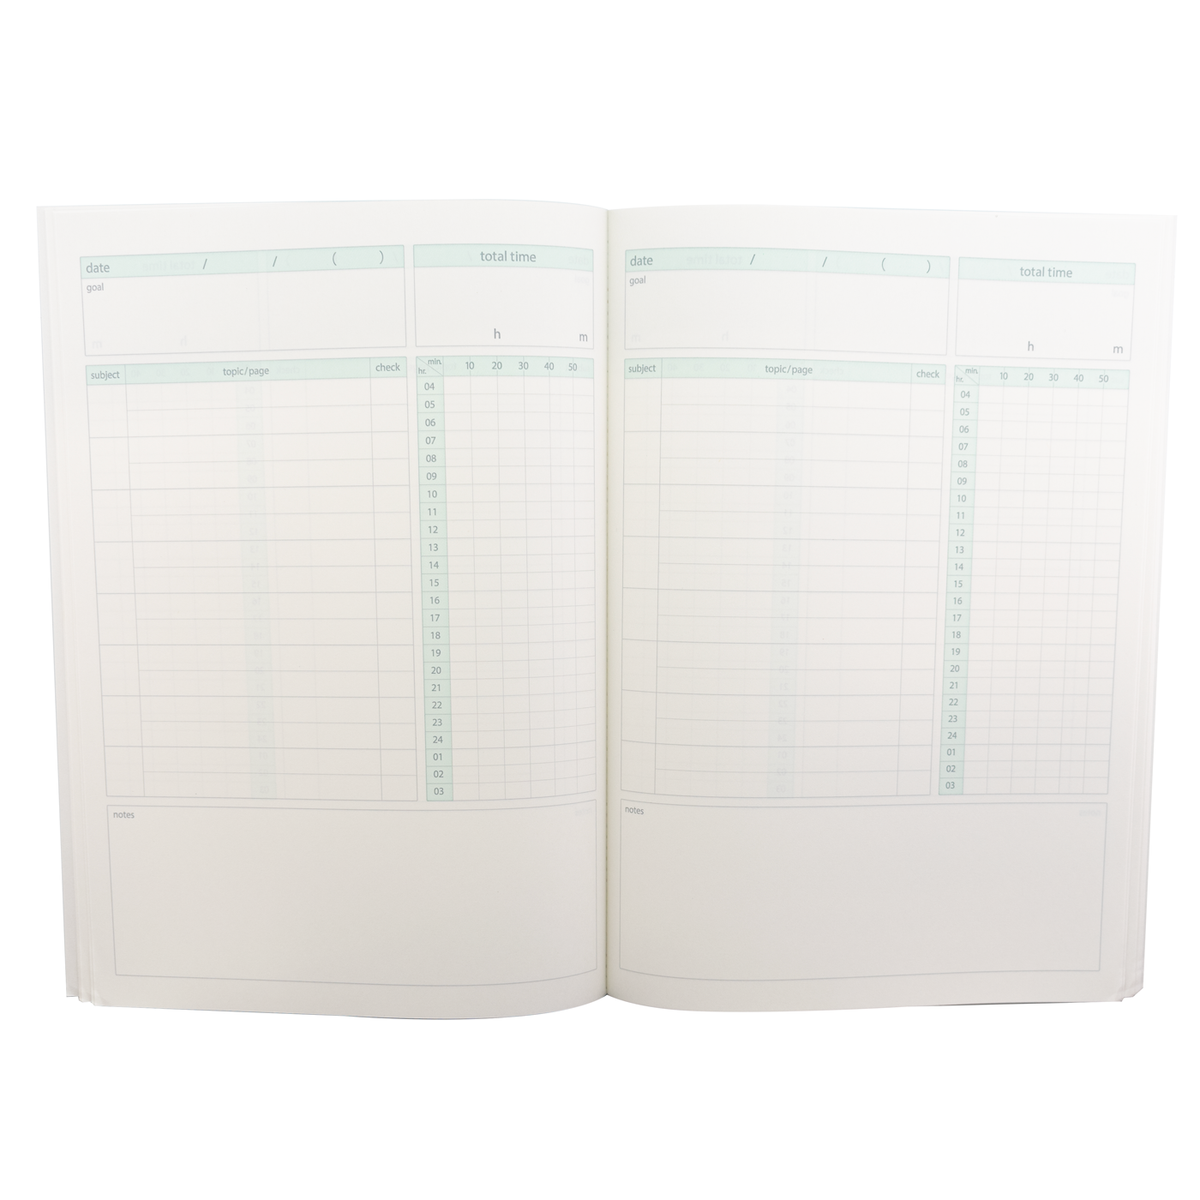 Kokuyo Campus Study Planner Daily Visualized - Green